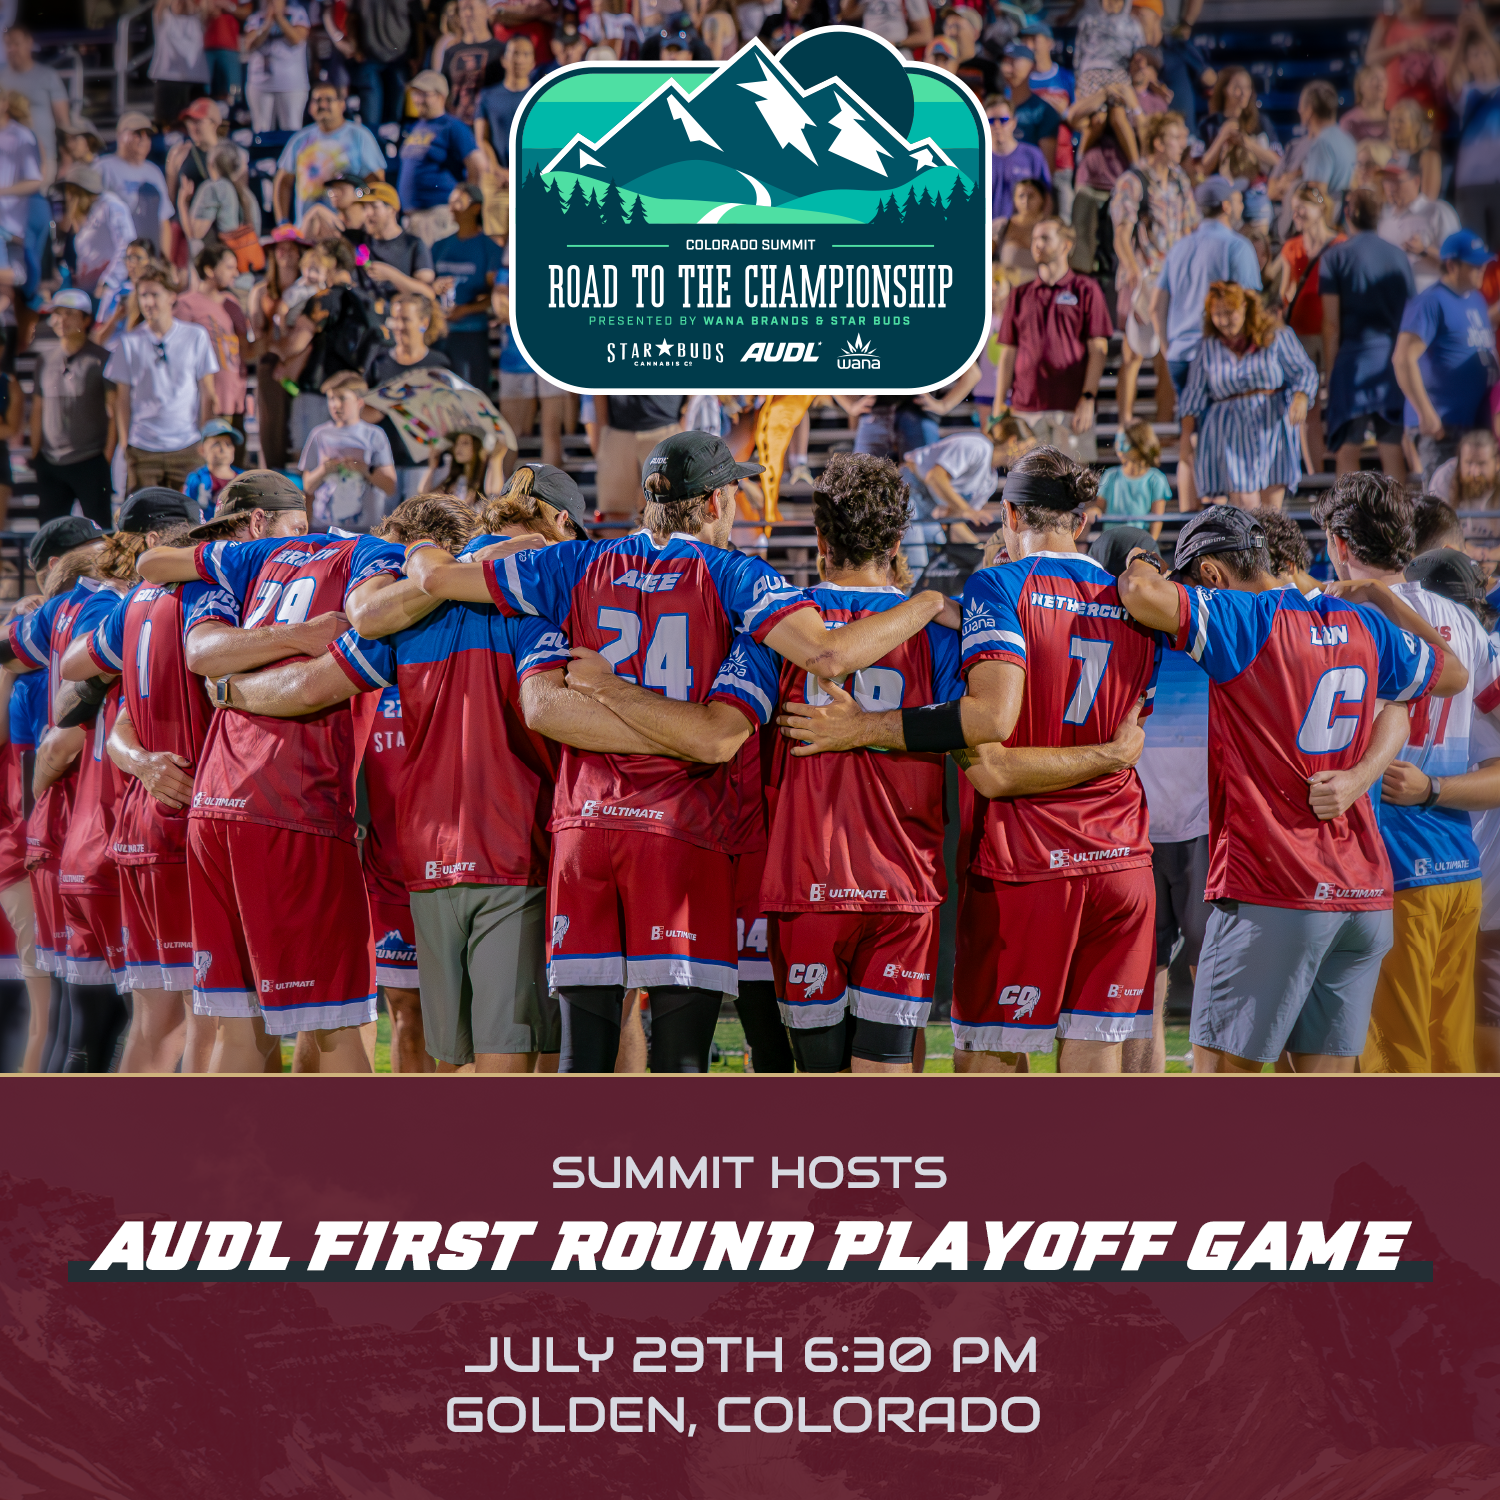 Saturday, July 29th Colorado hosts AUDL Playoff Game